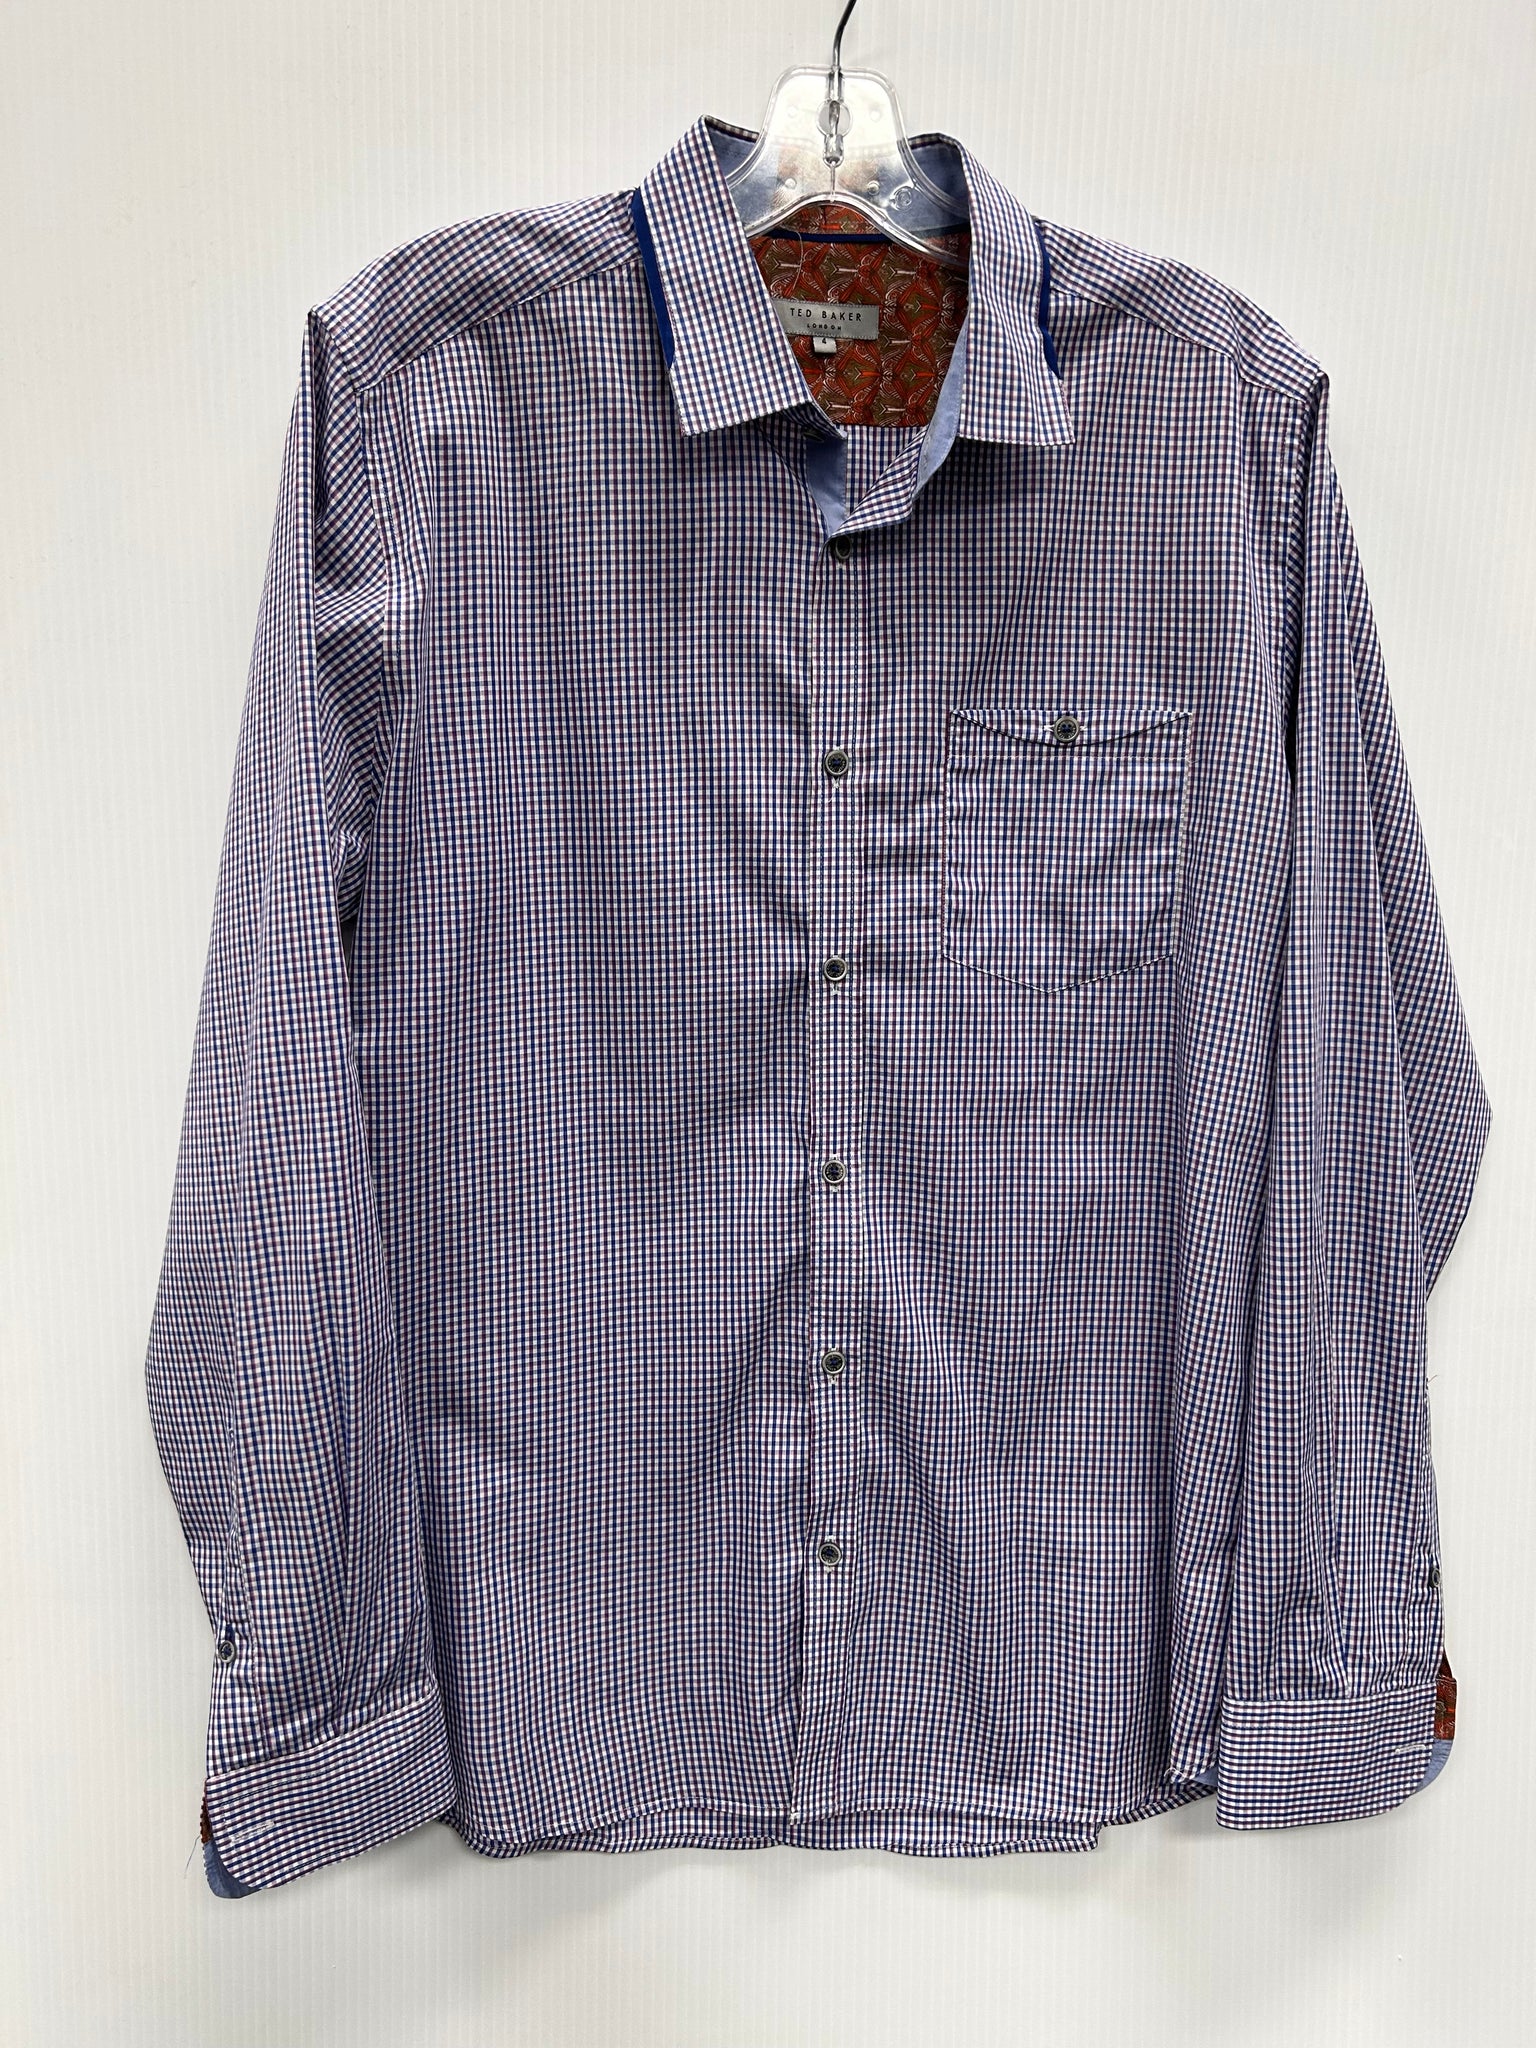 Size 4 Ted Baker London Shirt Item No. 21105